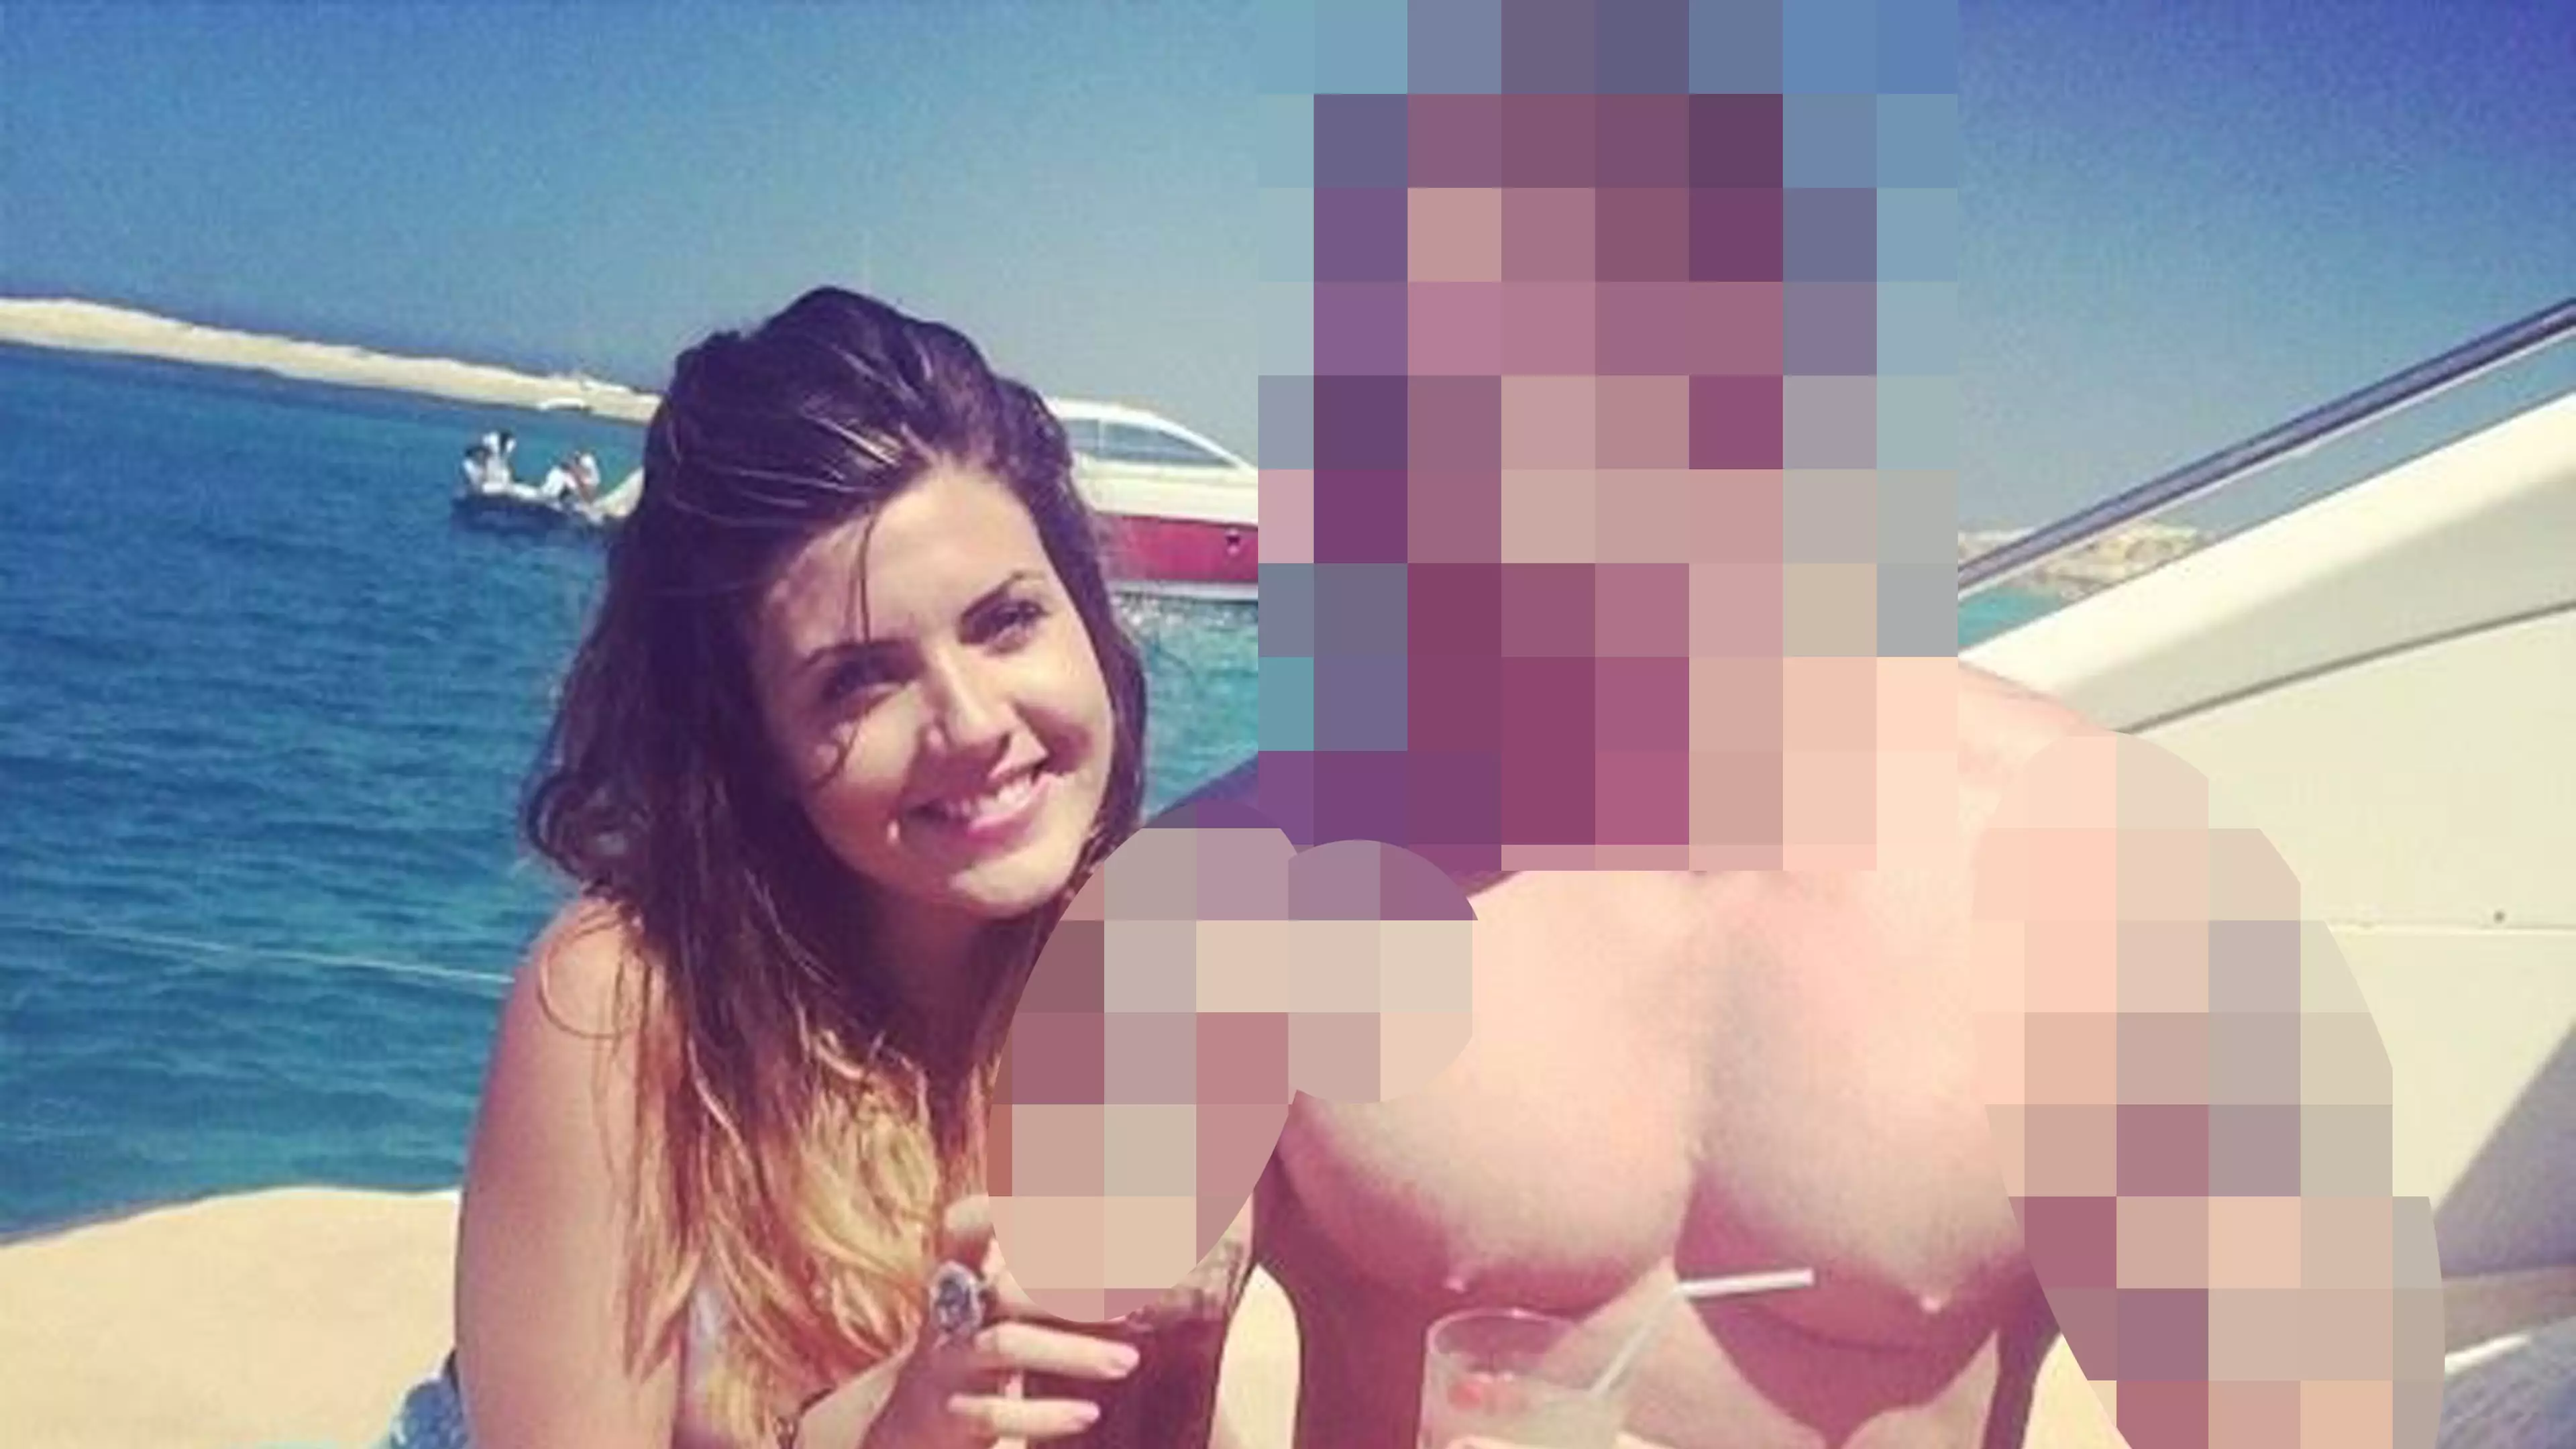 Newlywed Who Posted Romantic Holiday Snap Reveals She Discussed Divorce Just Minutes Later